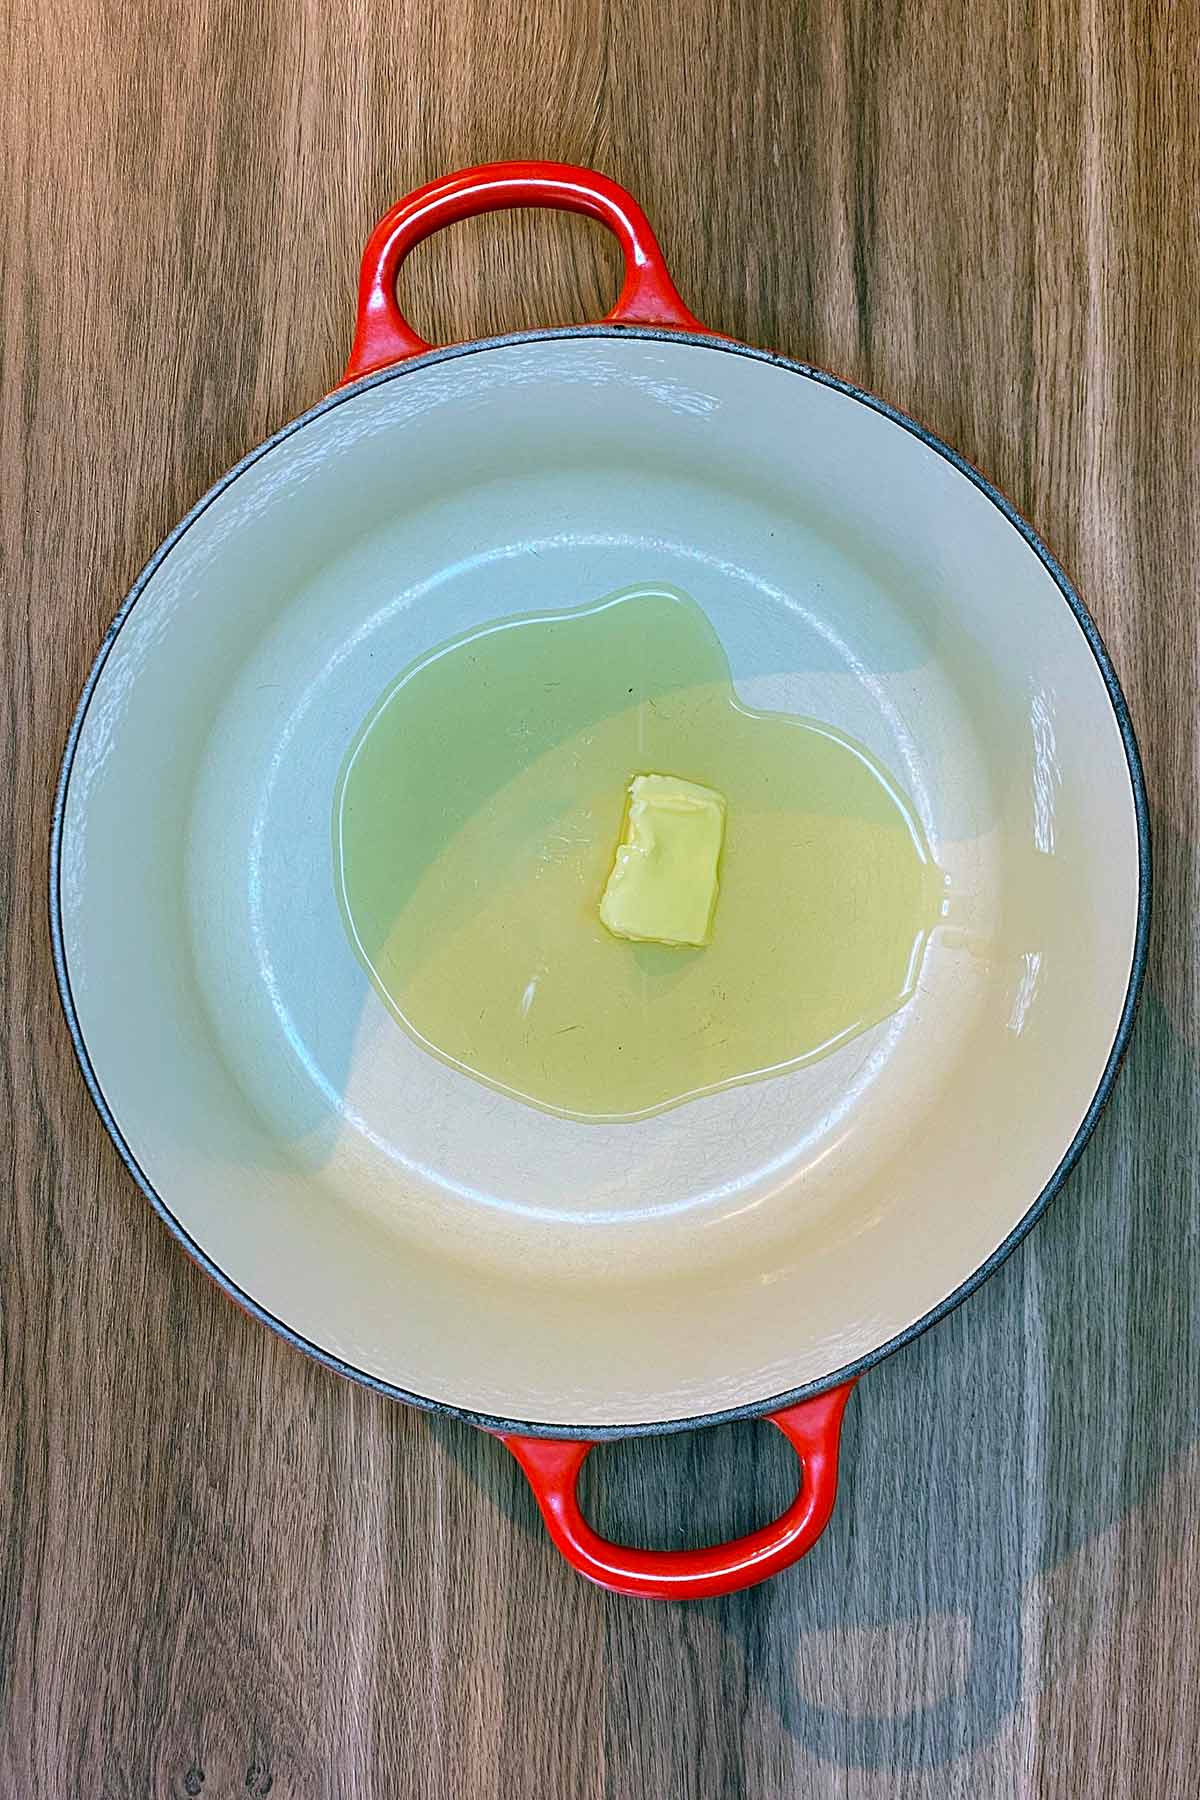 Oil and butter in a large red pan.